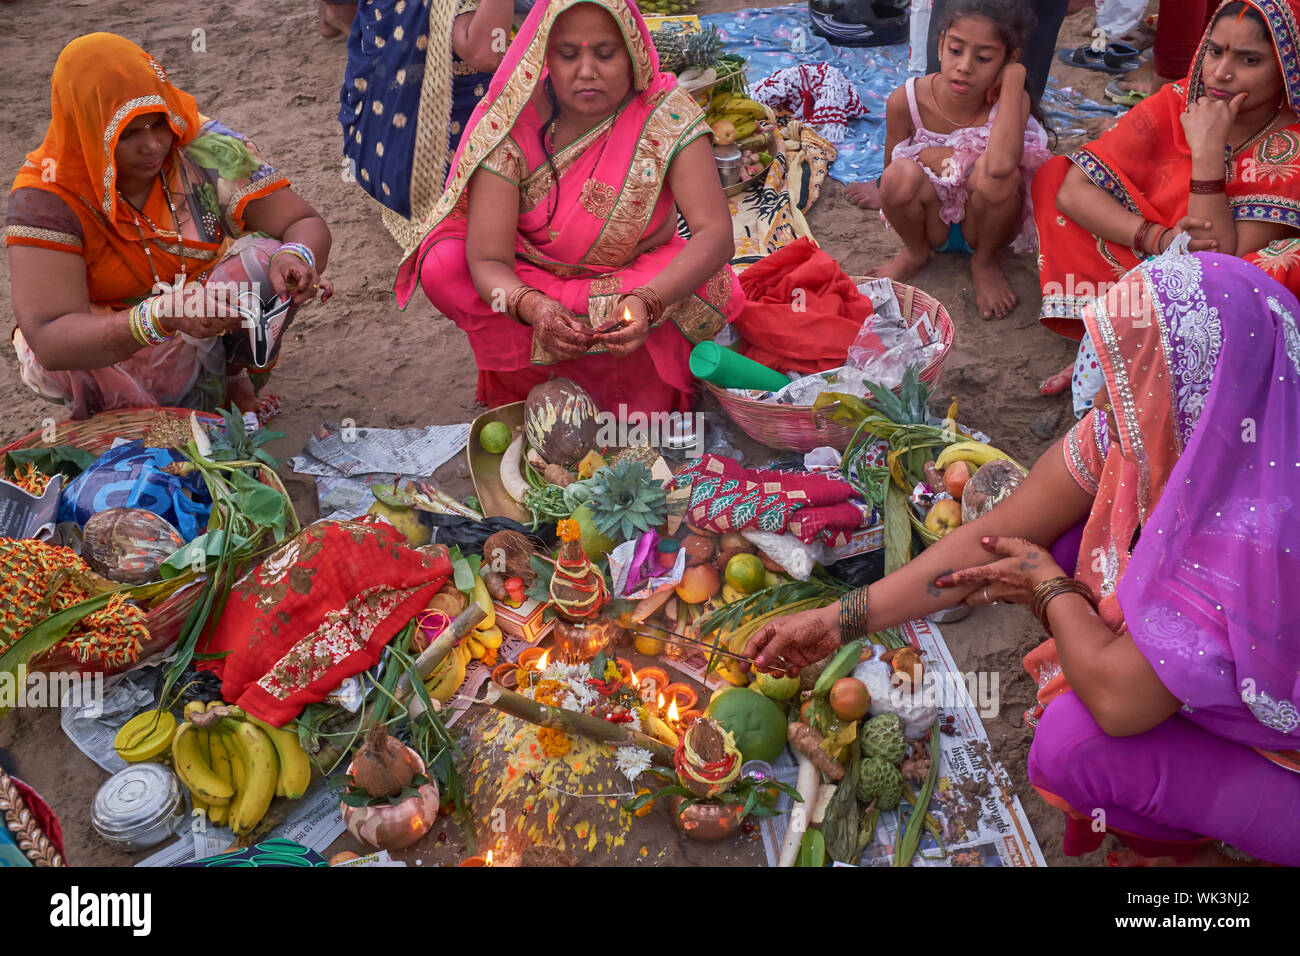 Women at Chowpatty Beach, Mumbai, India, celebrating Chhath Puja with sacrificial offerings to assure the health and long lives of their husbands Stock Photo